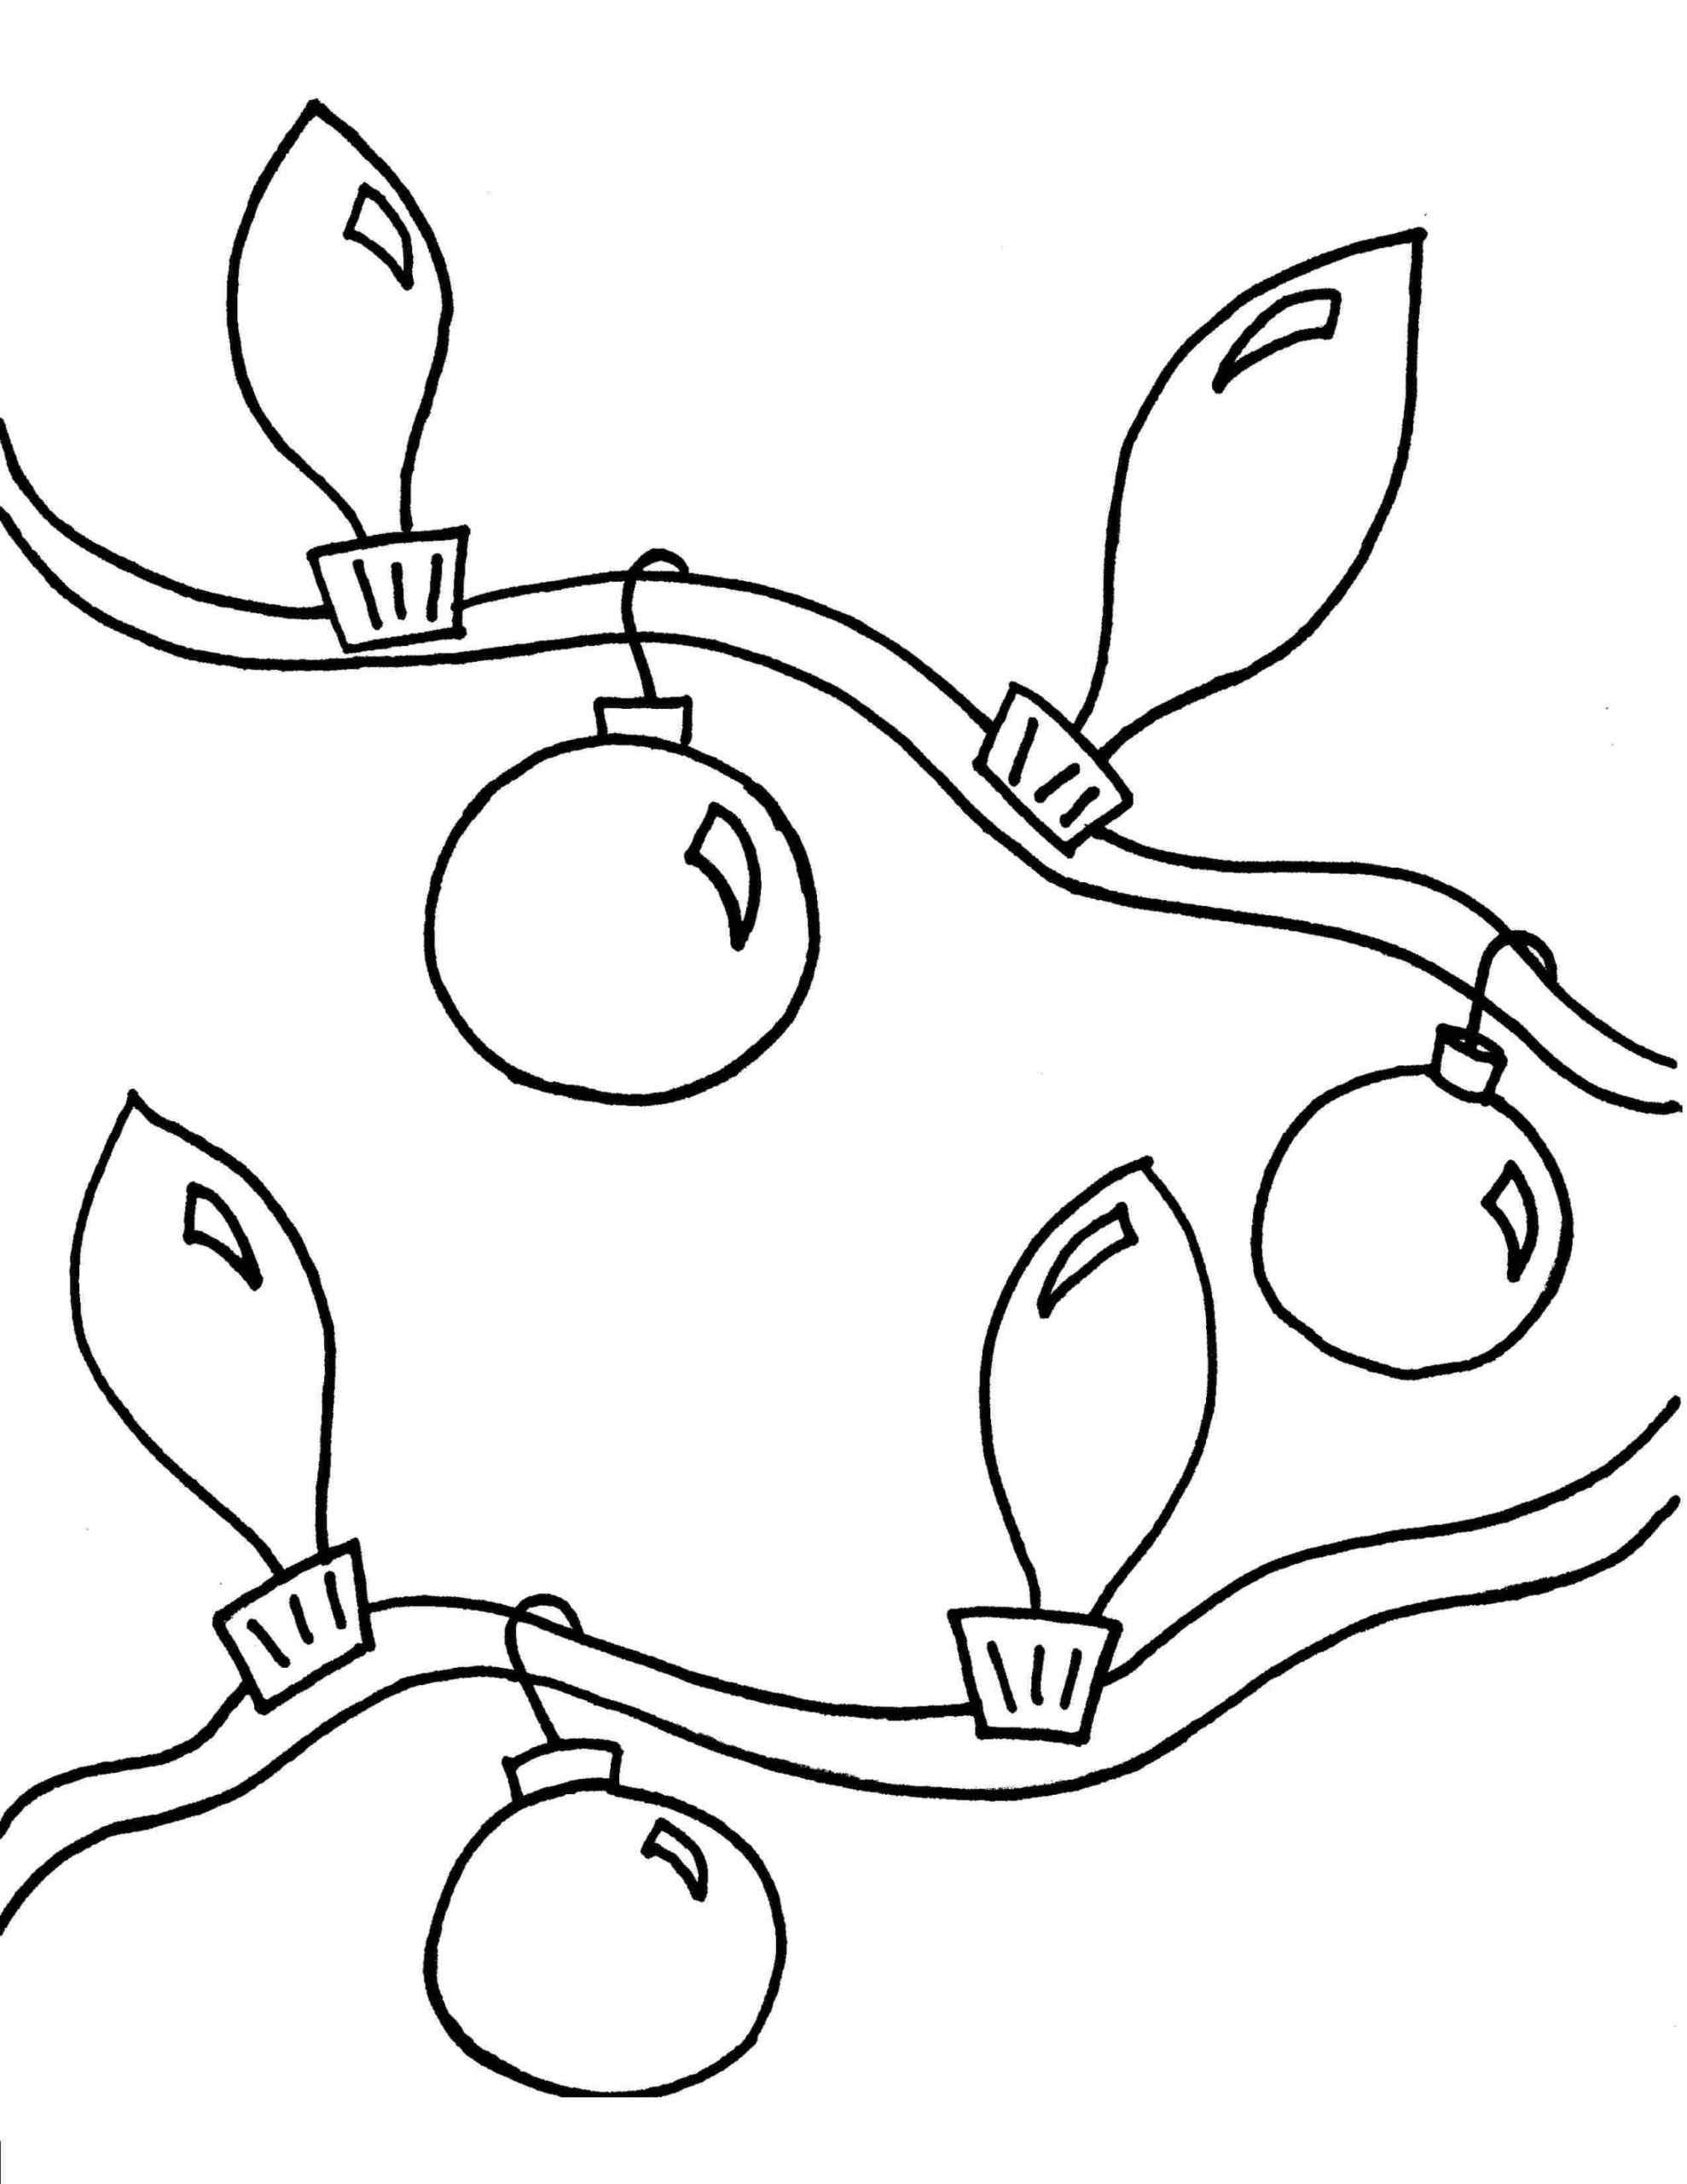 Color Will Your Garland Shine Coloring Page